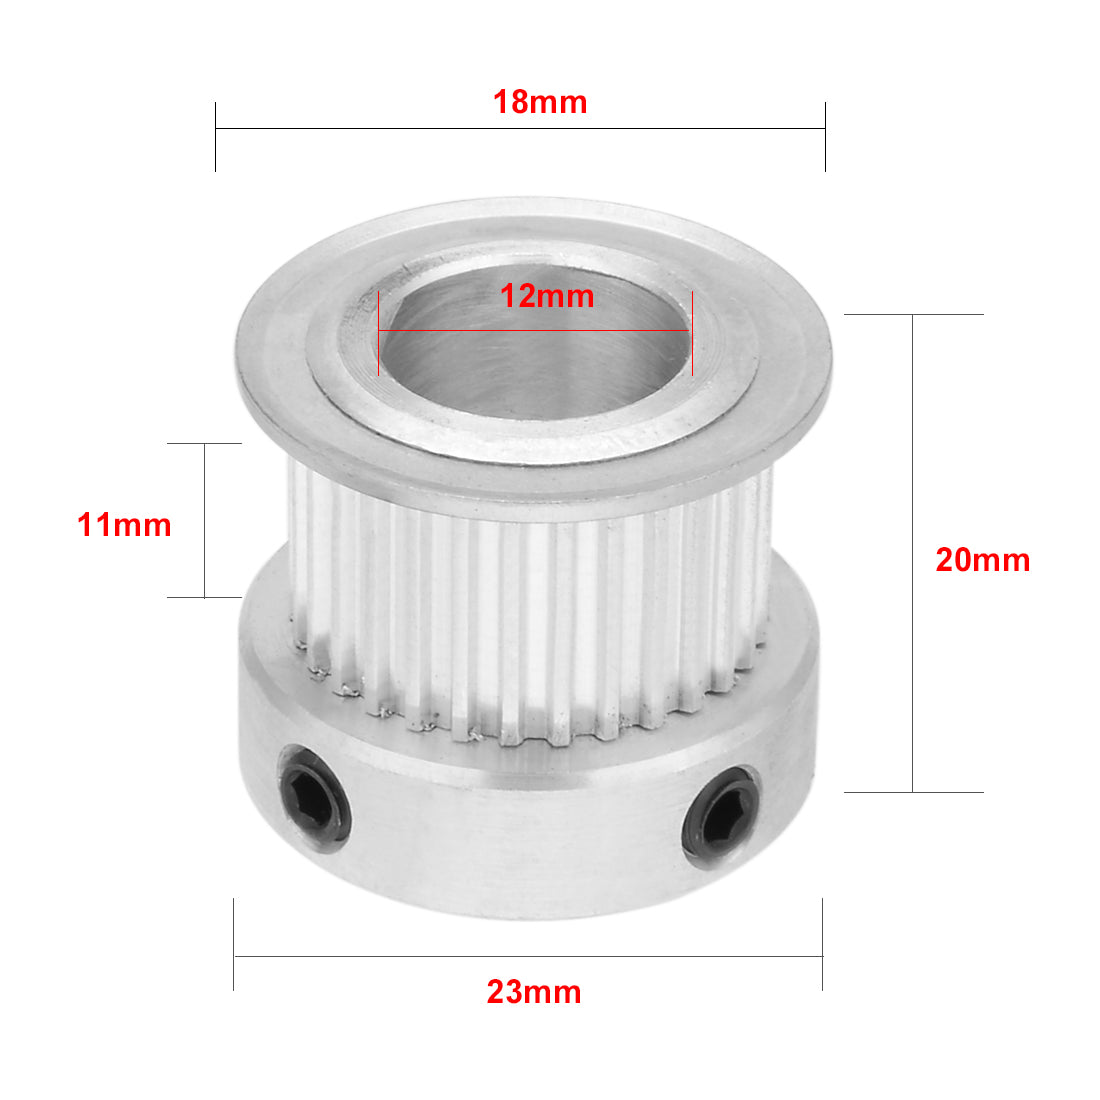 uxcell Uxcell Aluminum M-X-L 30 Teeth 12mm Bore Timing Belt Idler Pulley Synchronous Wheel 10mm Belt for 3D Printer CNC